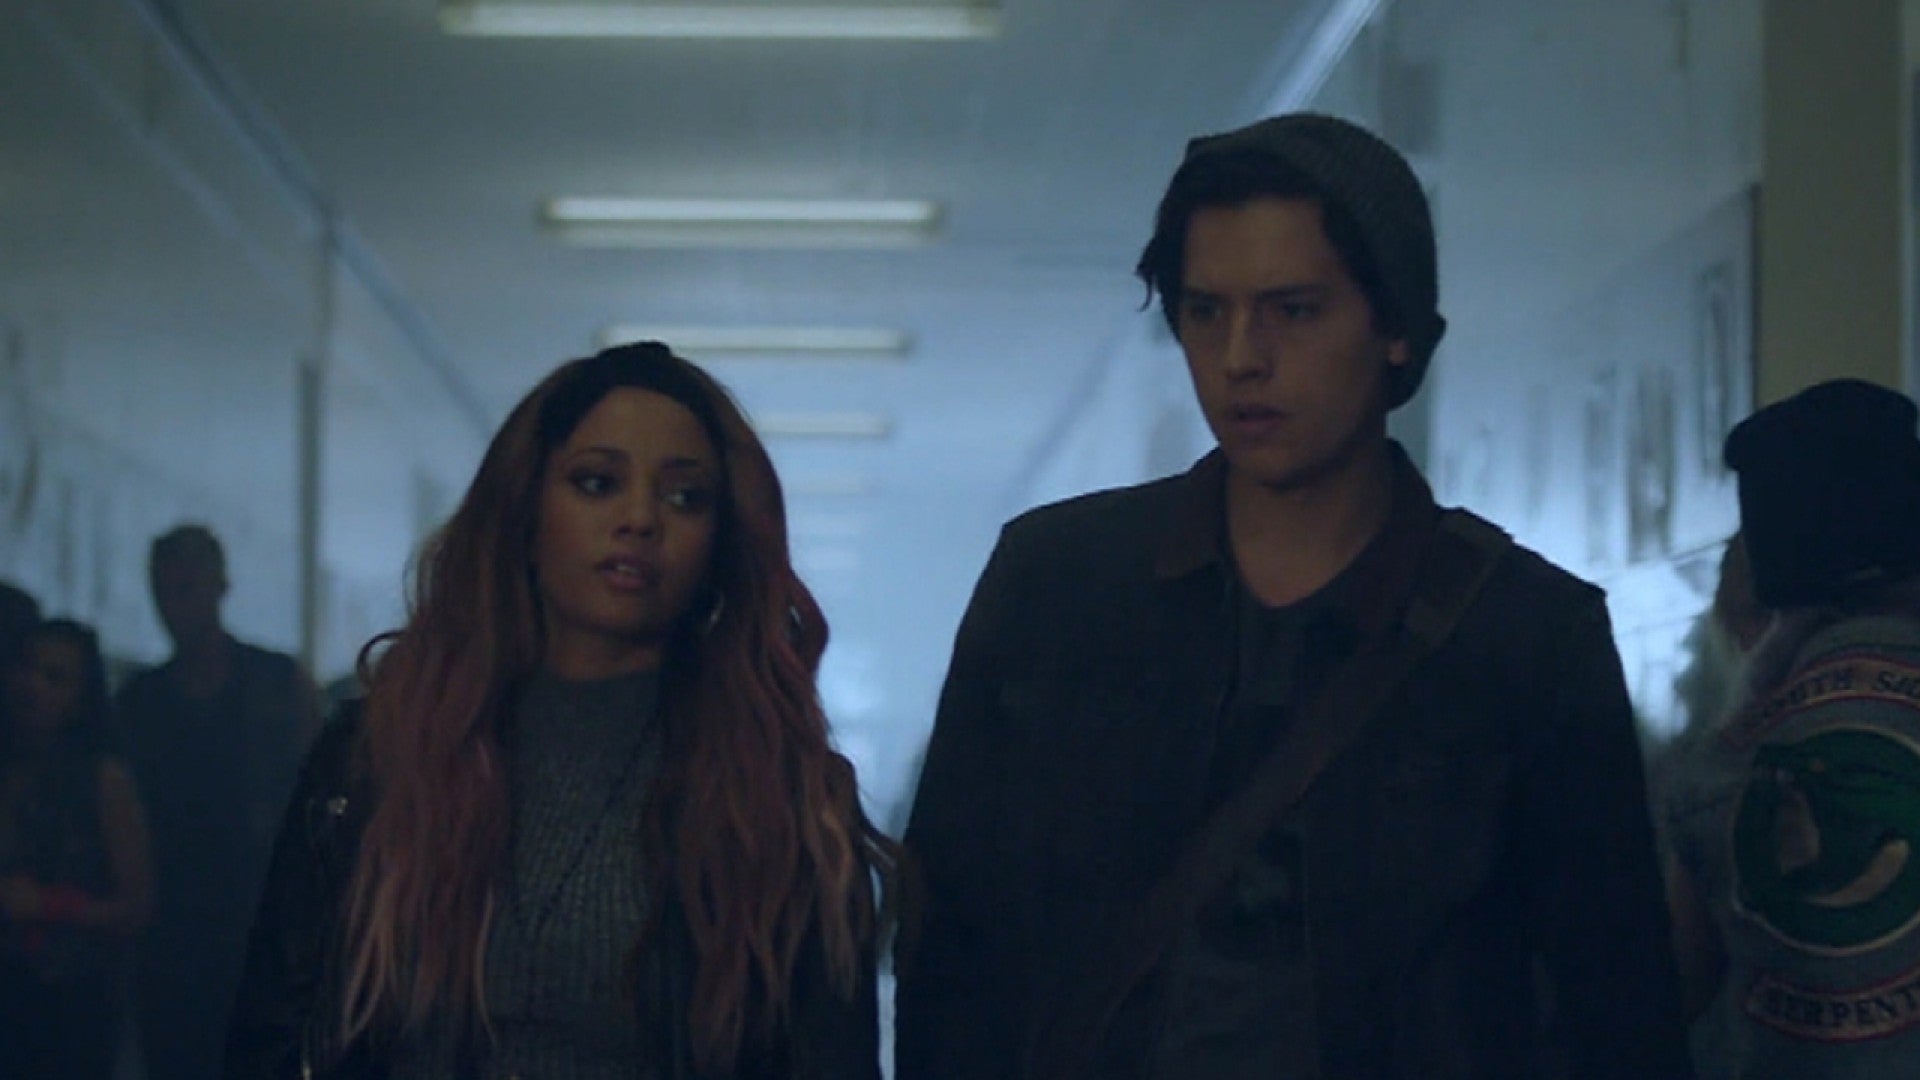 Riverdale Reveals Toni Topaz Is Bisexual Who Should She Date Next Star Madelaine Petsch Weighs In Entertainment Tonight